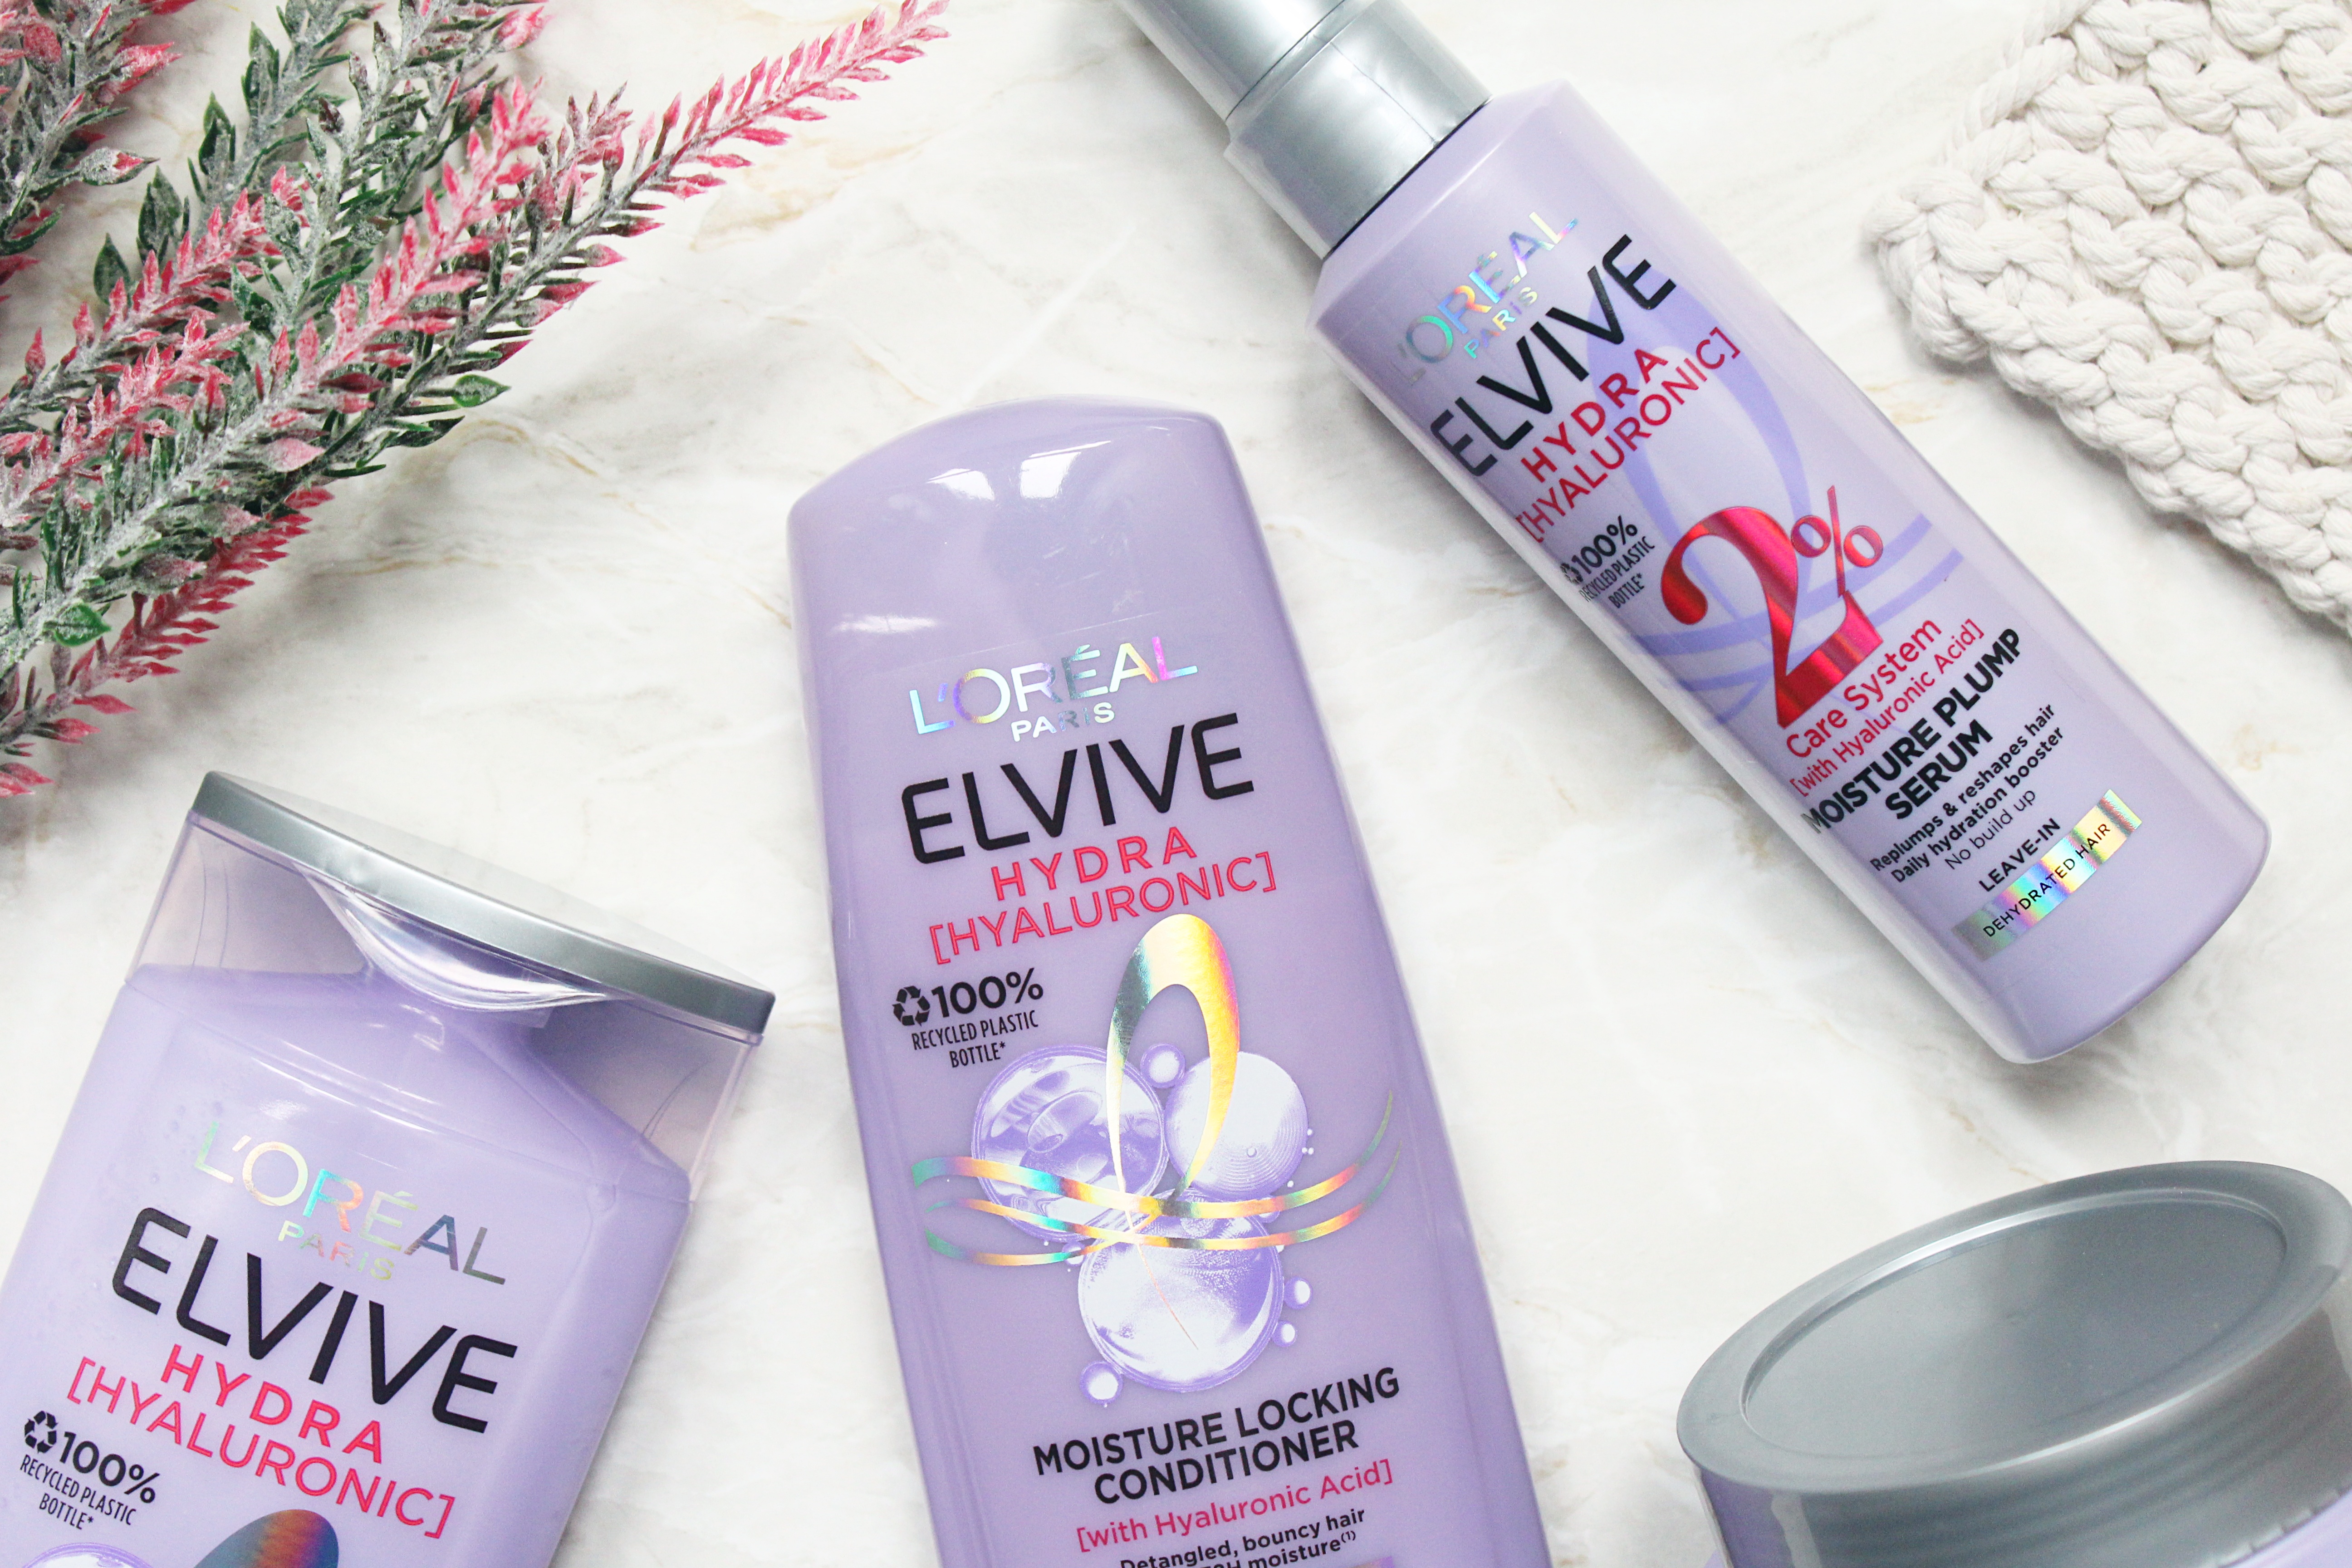 L'Oréal Elvive Hydra [Hyaluronic] New Hair Care Review